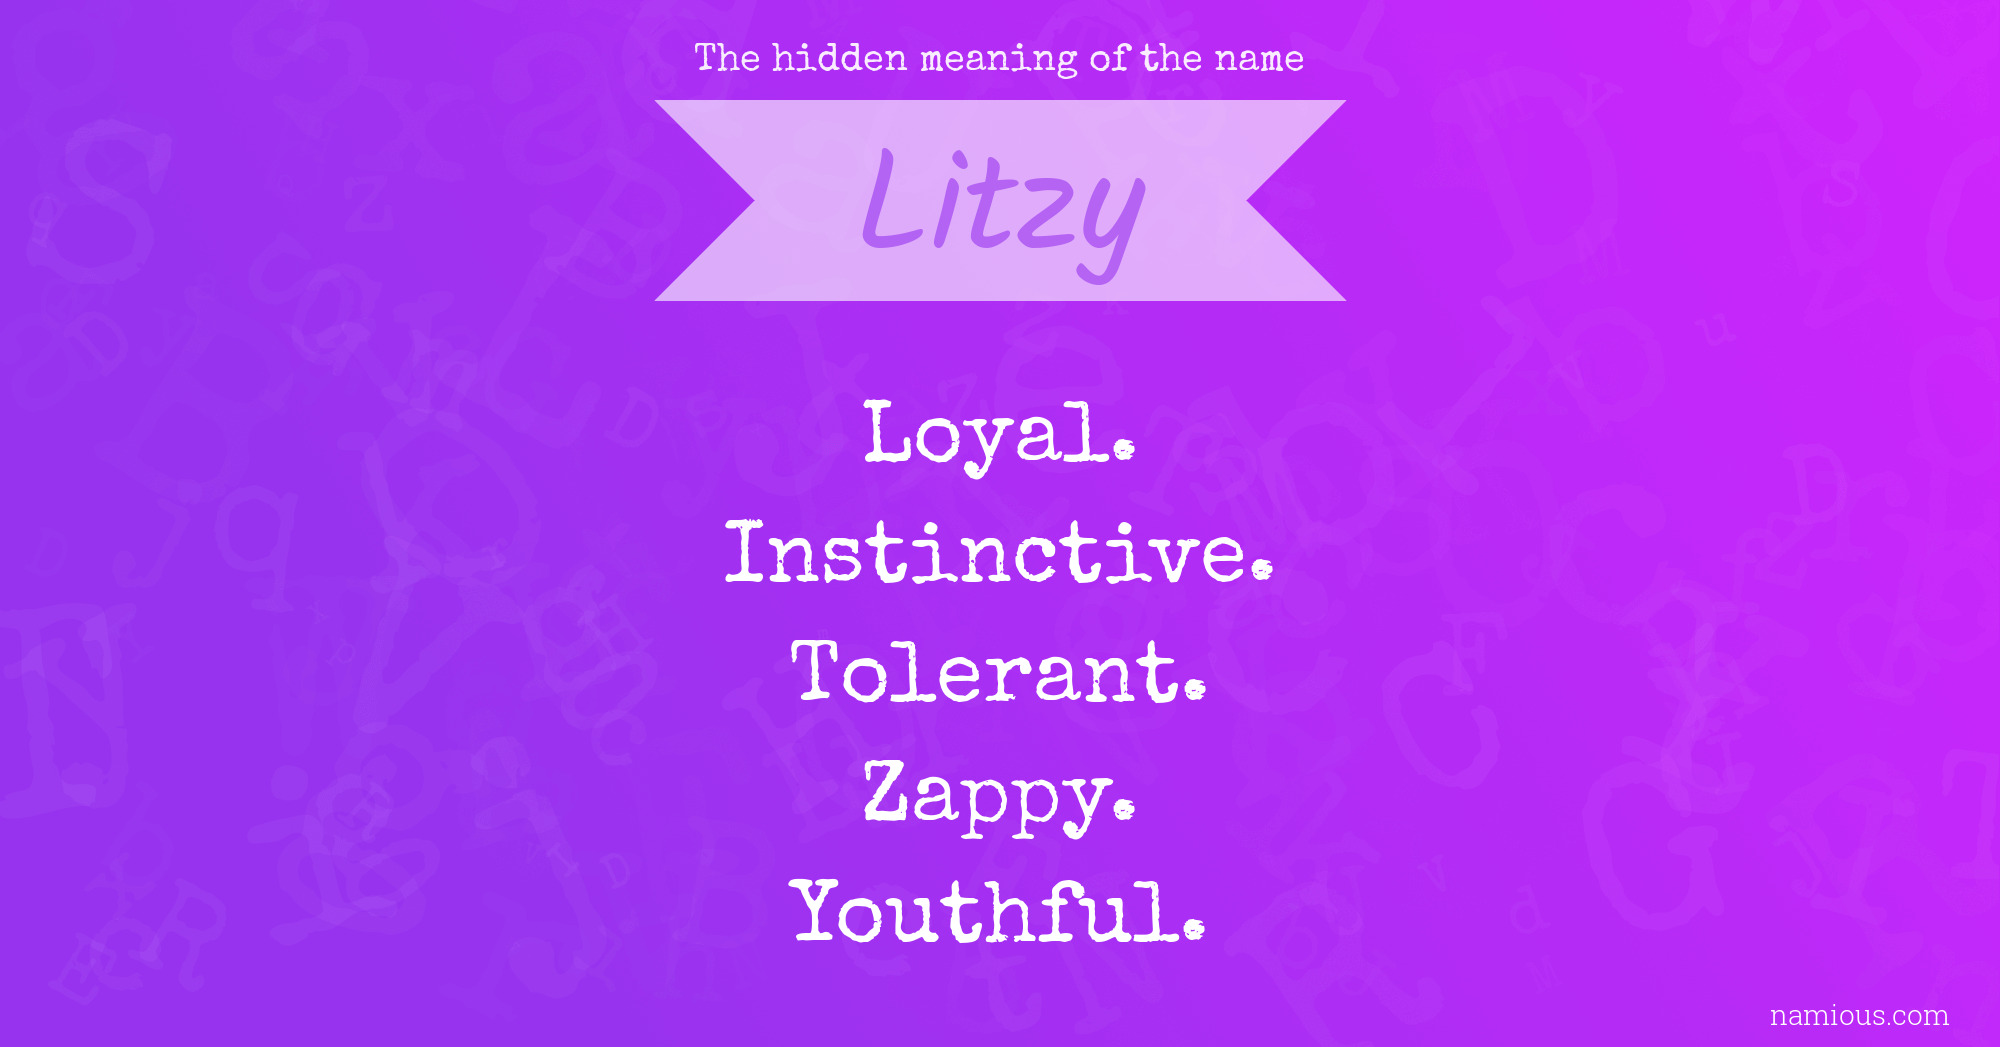 The hidden meaning of the name Litzy